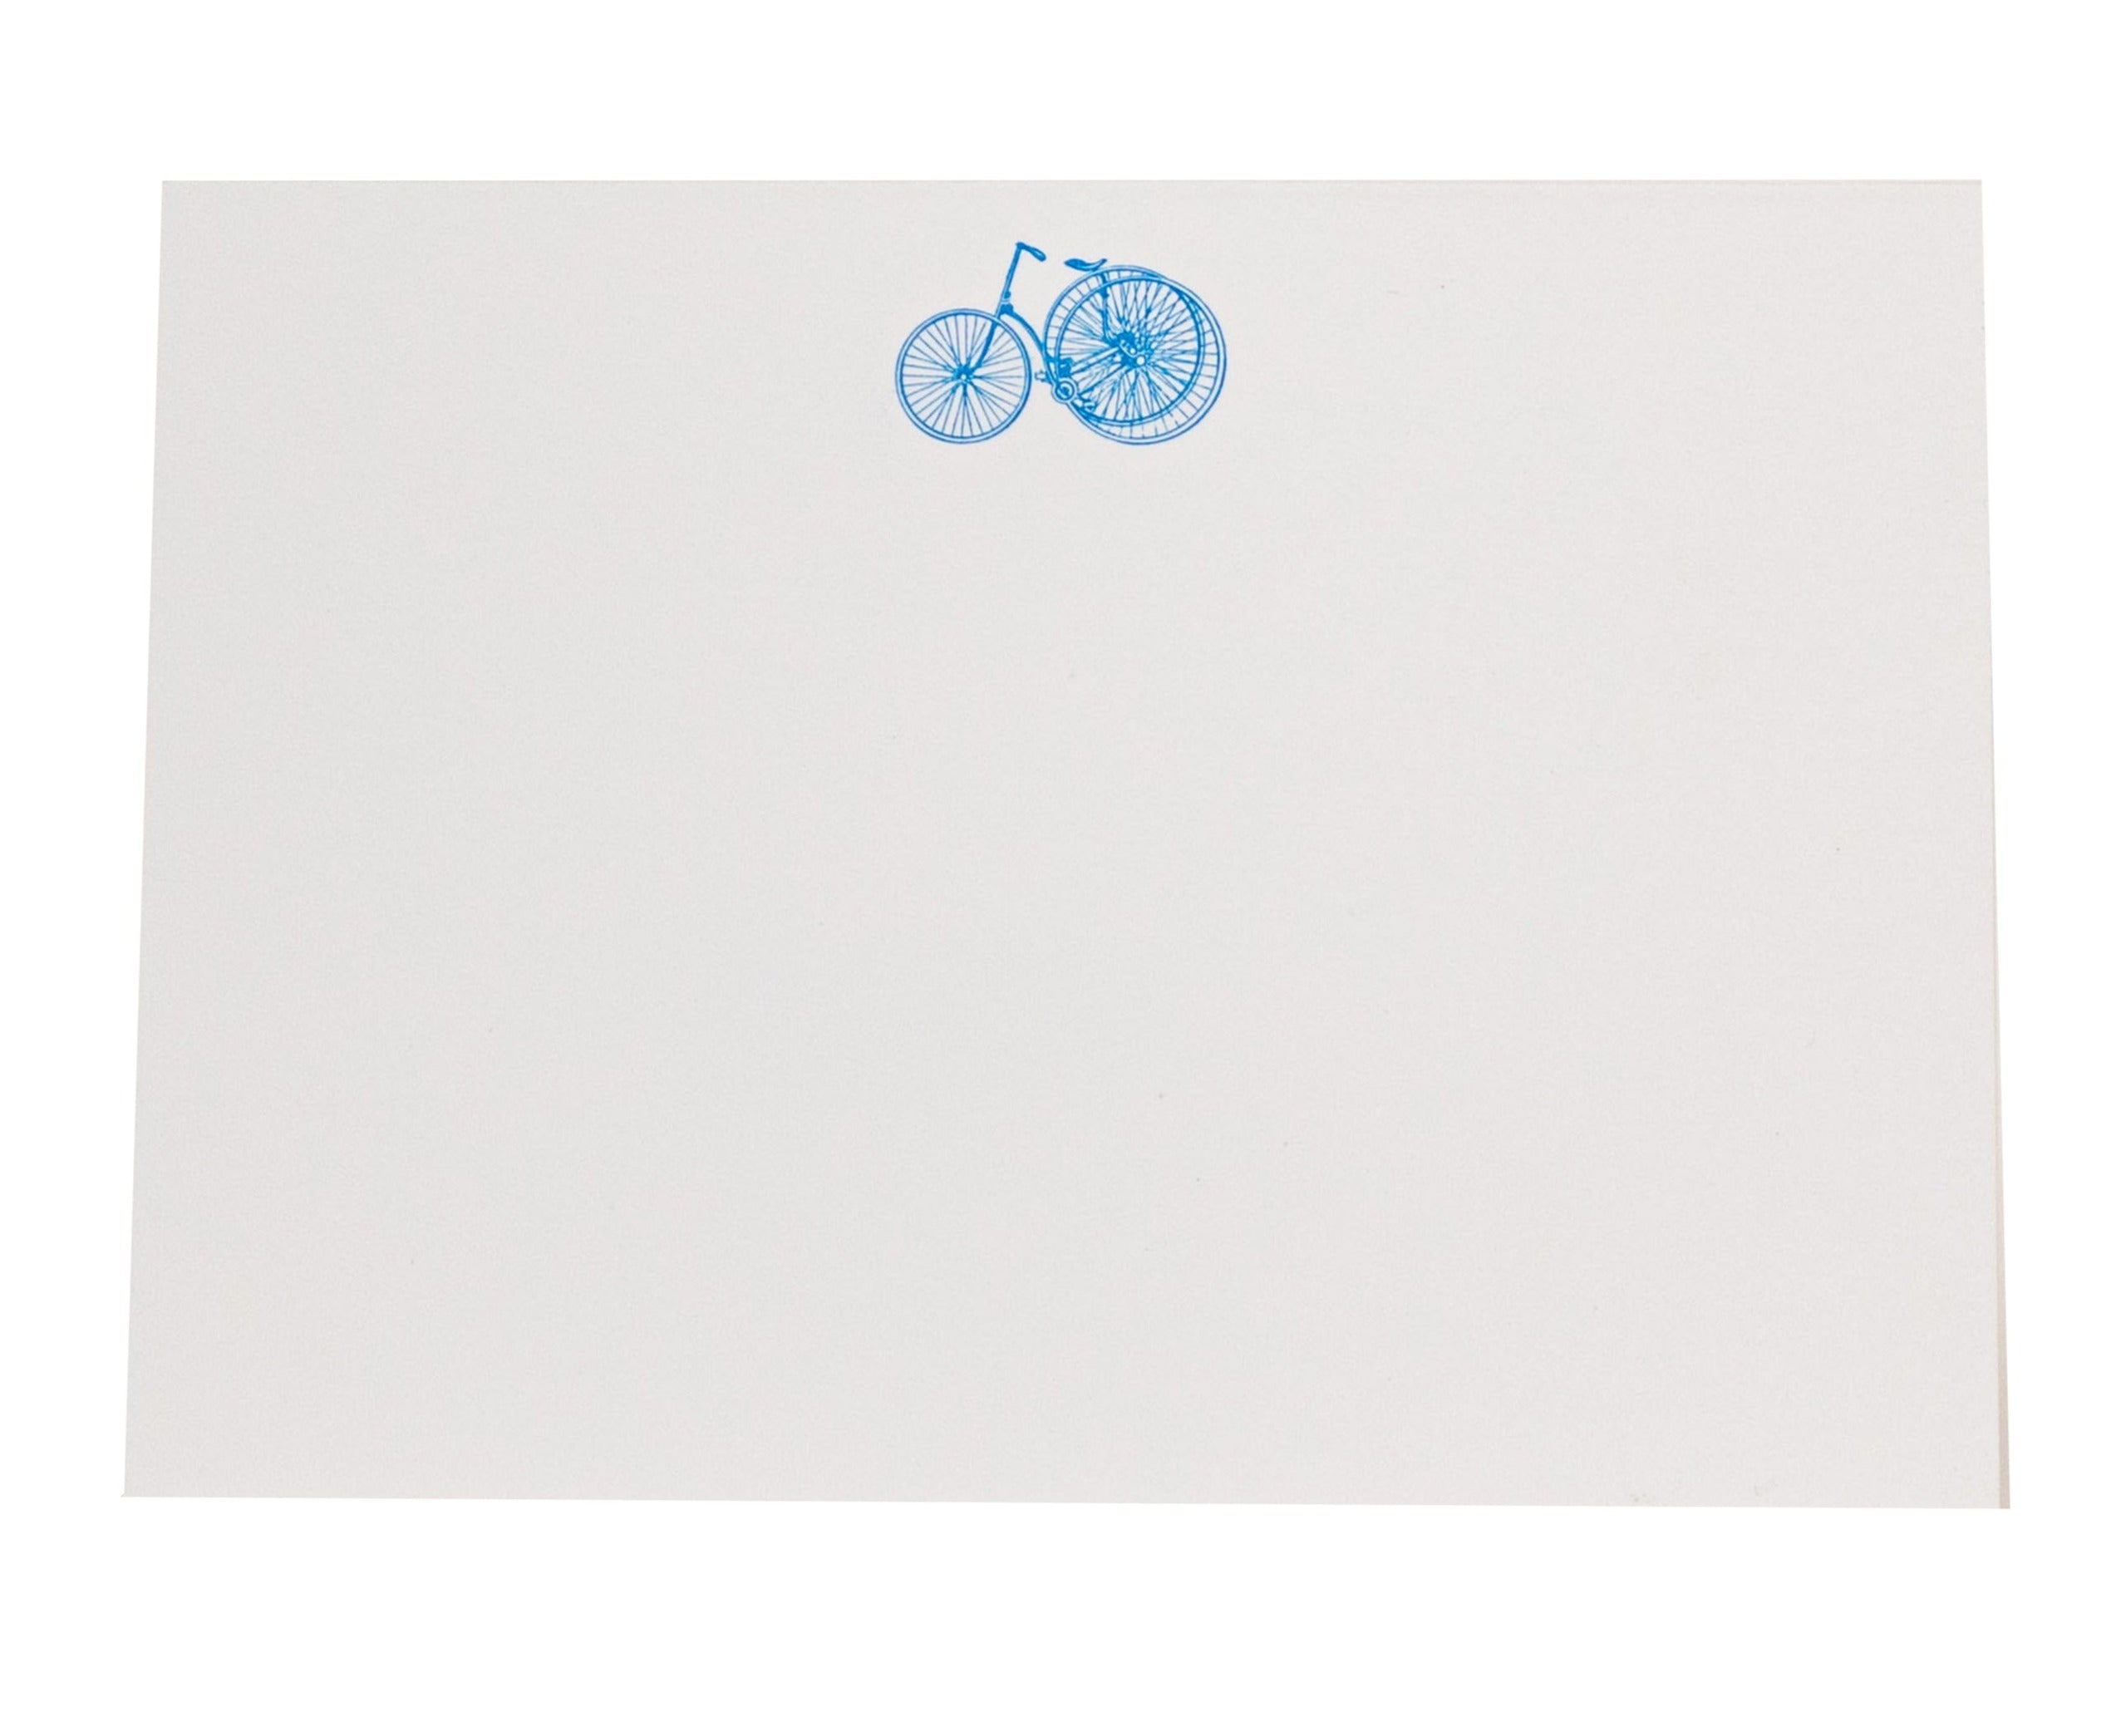 Engraved 3-Wheel Bicycle Jotter